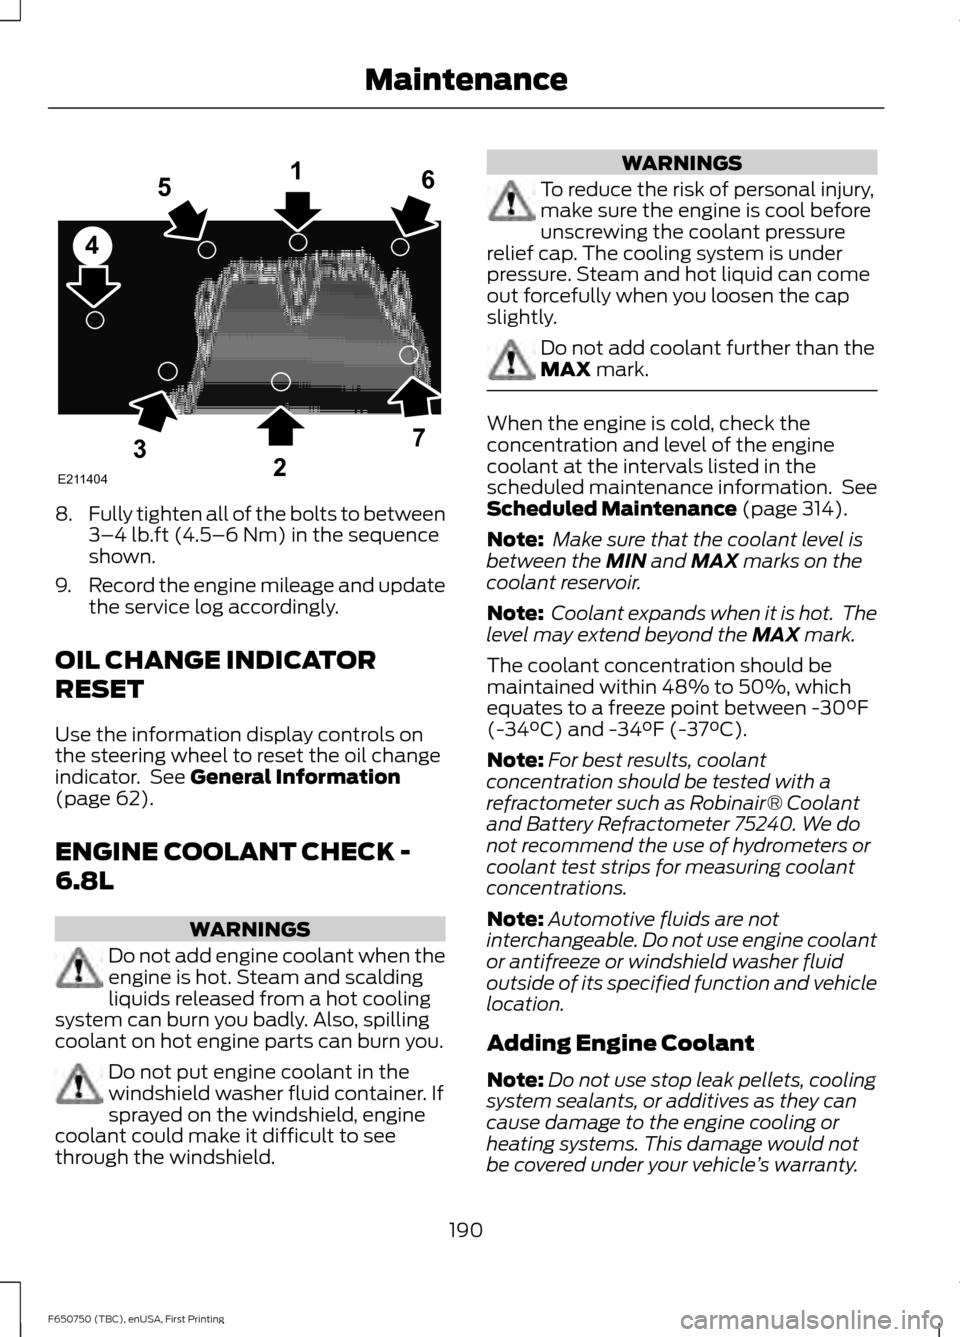 FORD F650 2016 13.G User Guide 8.
Fully tighten all of the bolts to between
3–4 lb.ft (4.5–6 Nm) in the sequence
shown.
9. Record the engine mileage and update
the service log accordingly.
OIL CHANGE INDICATOR
RESET
Use the inf